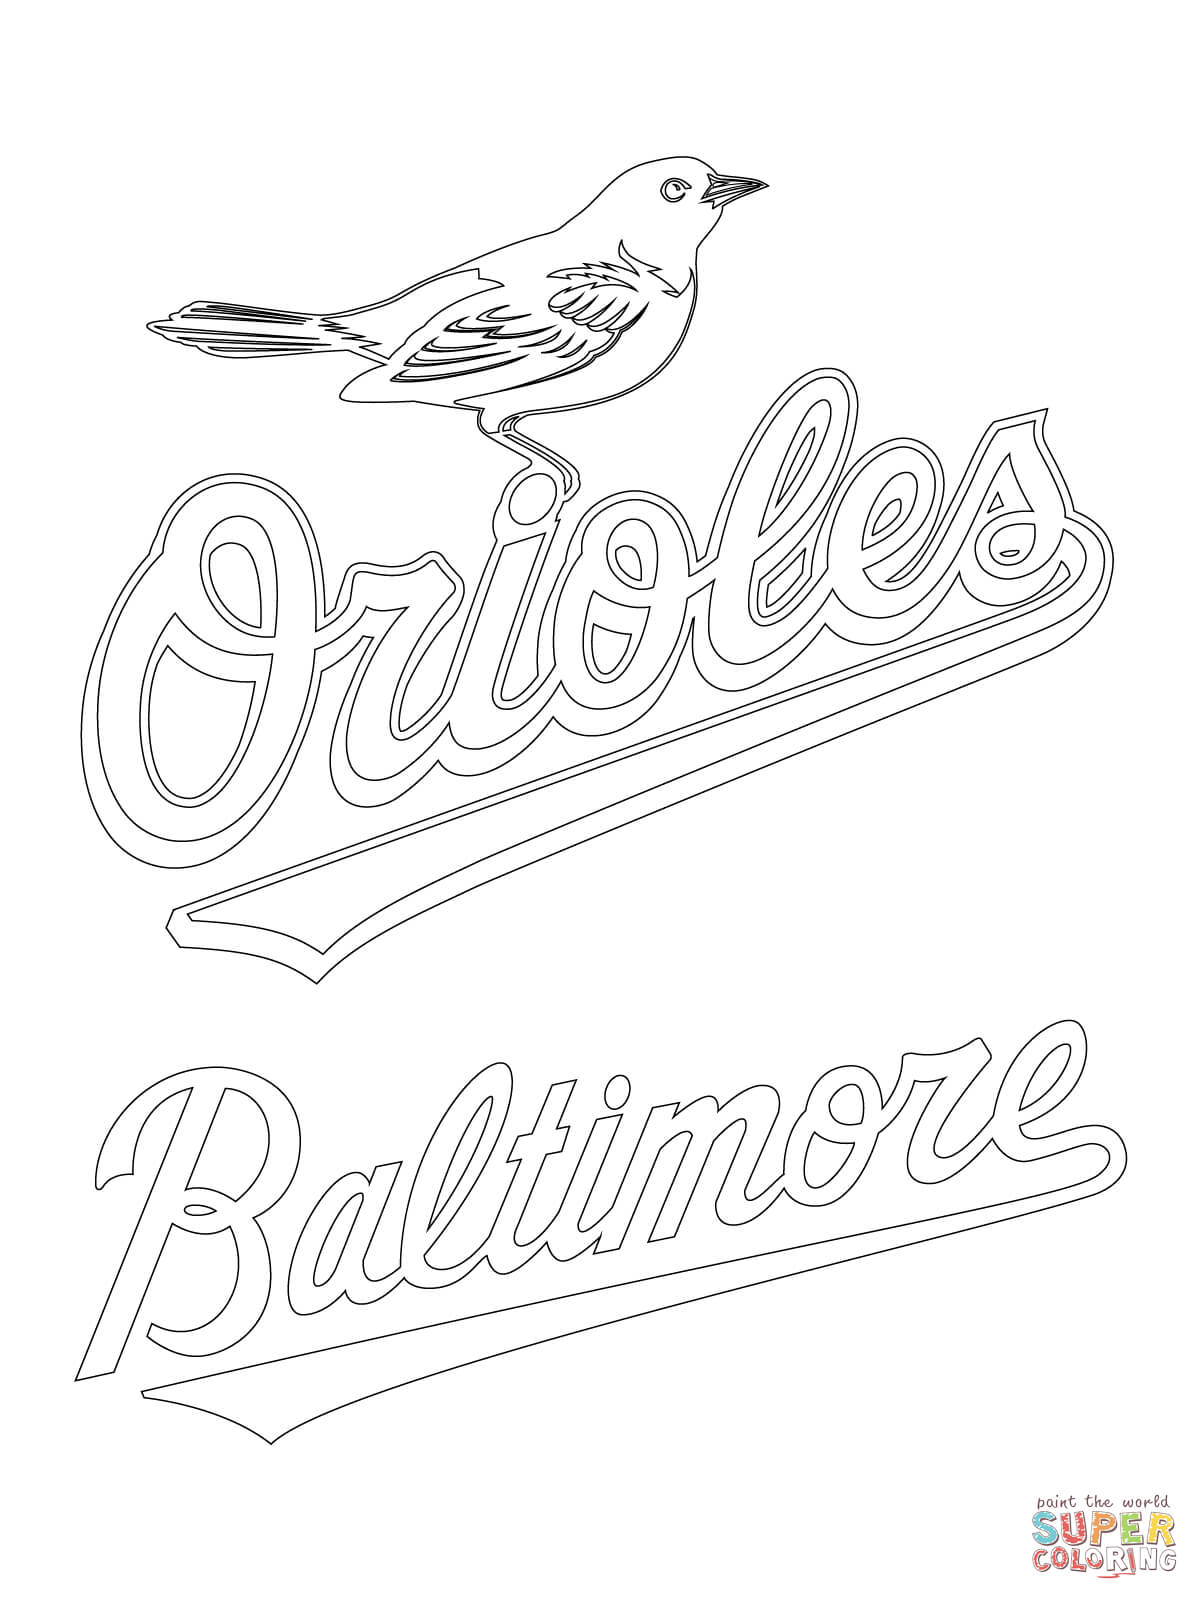 Baltimore Orioles Logo coloring page | Free Printable Coloring Pages